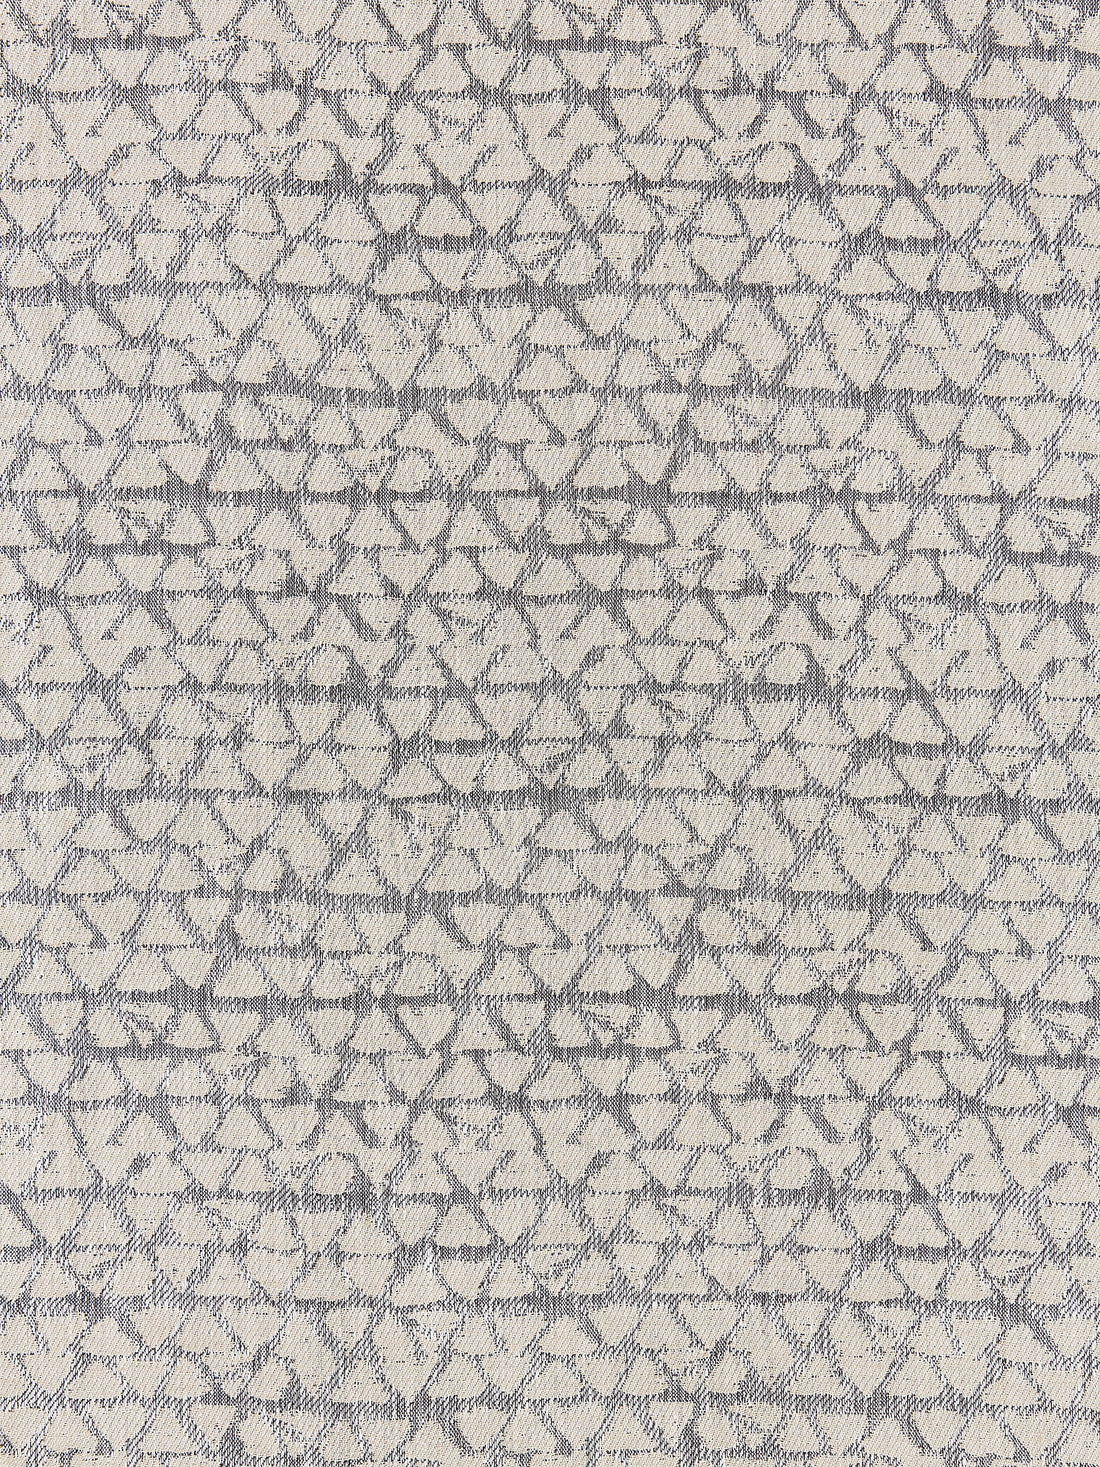 Kanoko fabric in smoke color - pattern number SC 000327148 - by Scalamandre in the Scalamandre Fabrics Book 1 collection